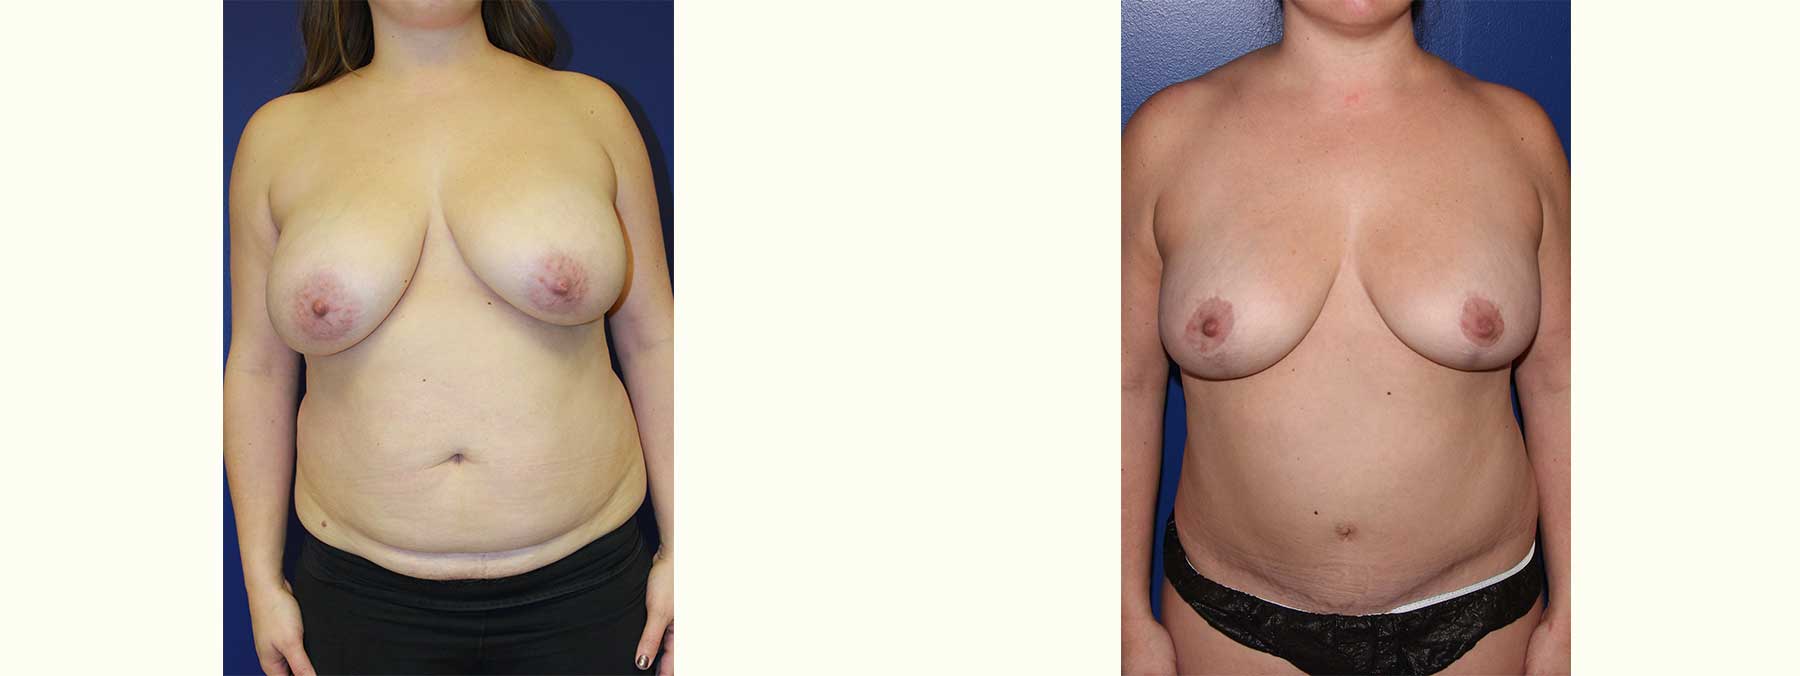 Before and After Image of Abdominoplasty